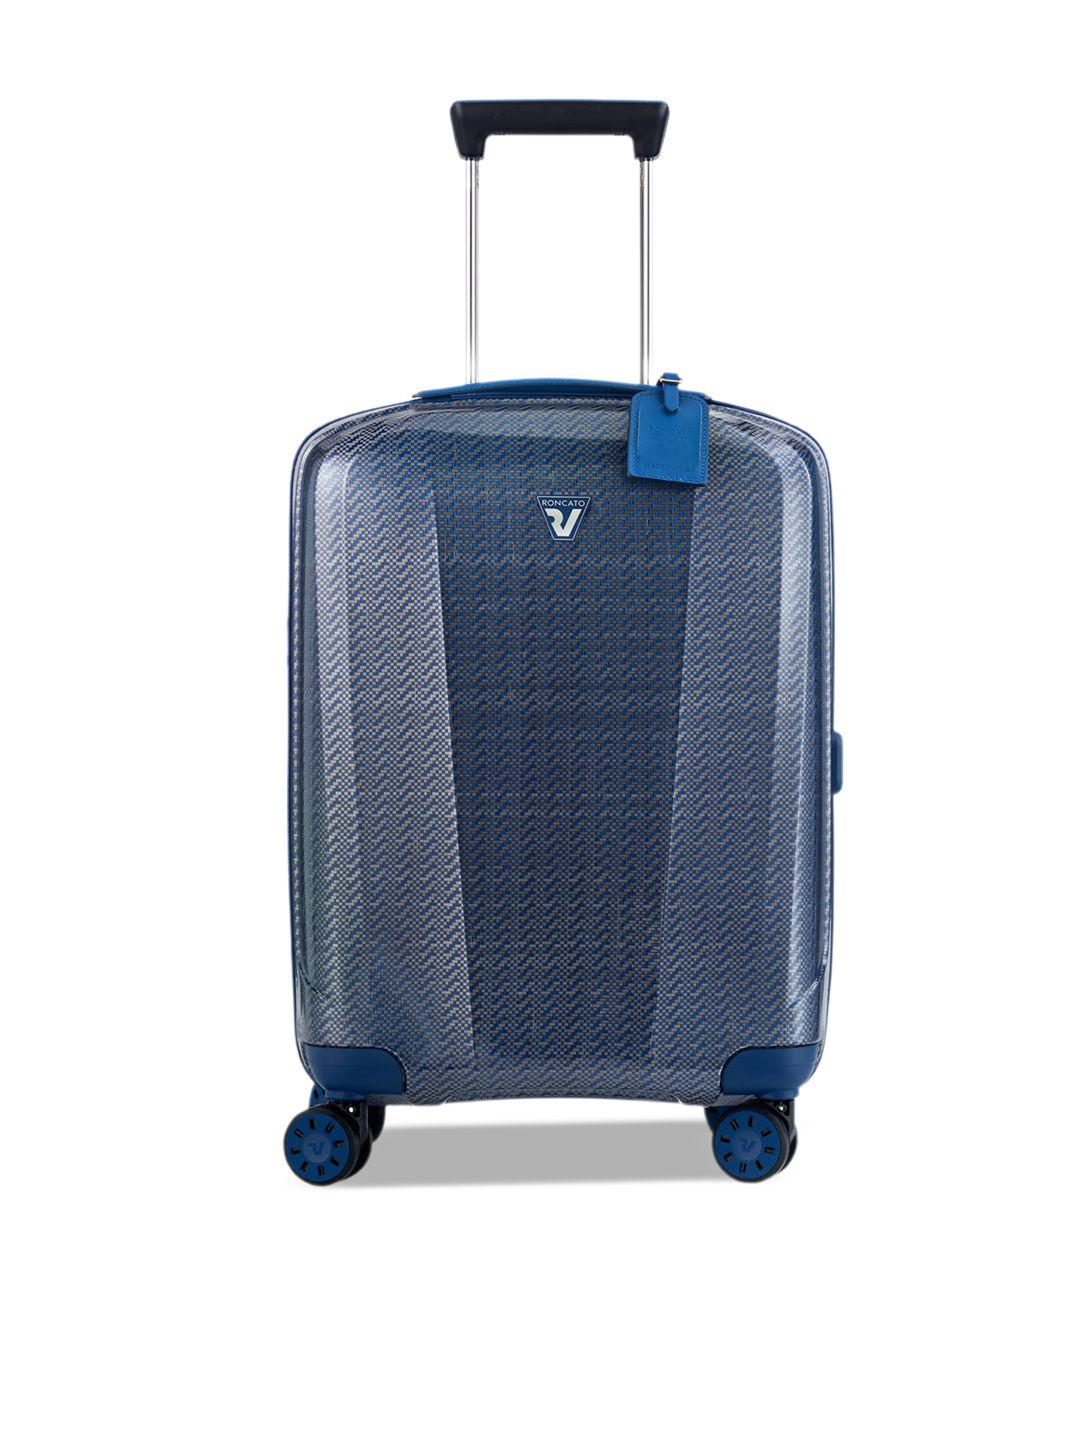 roncato textured hard-sided water resistant cabin trolley suitcase